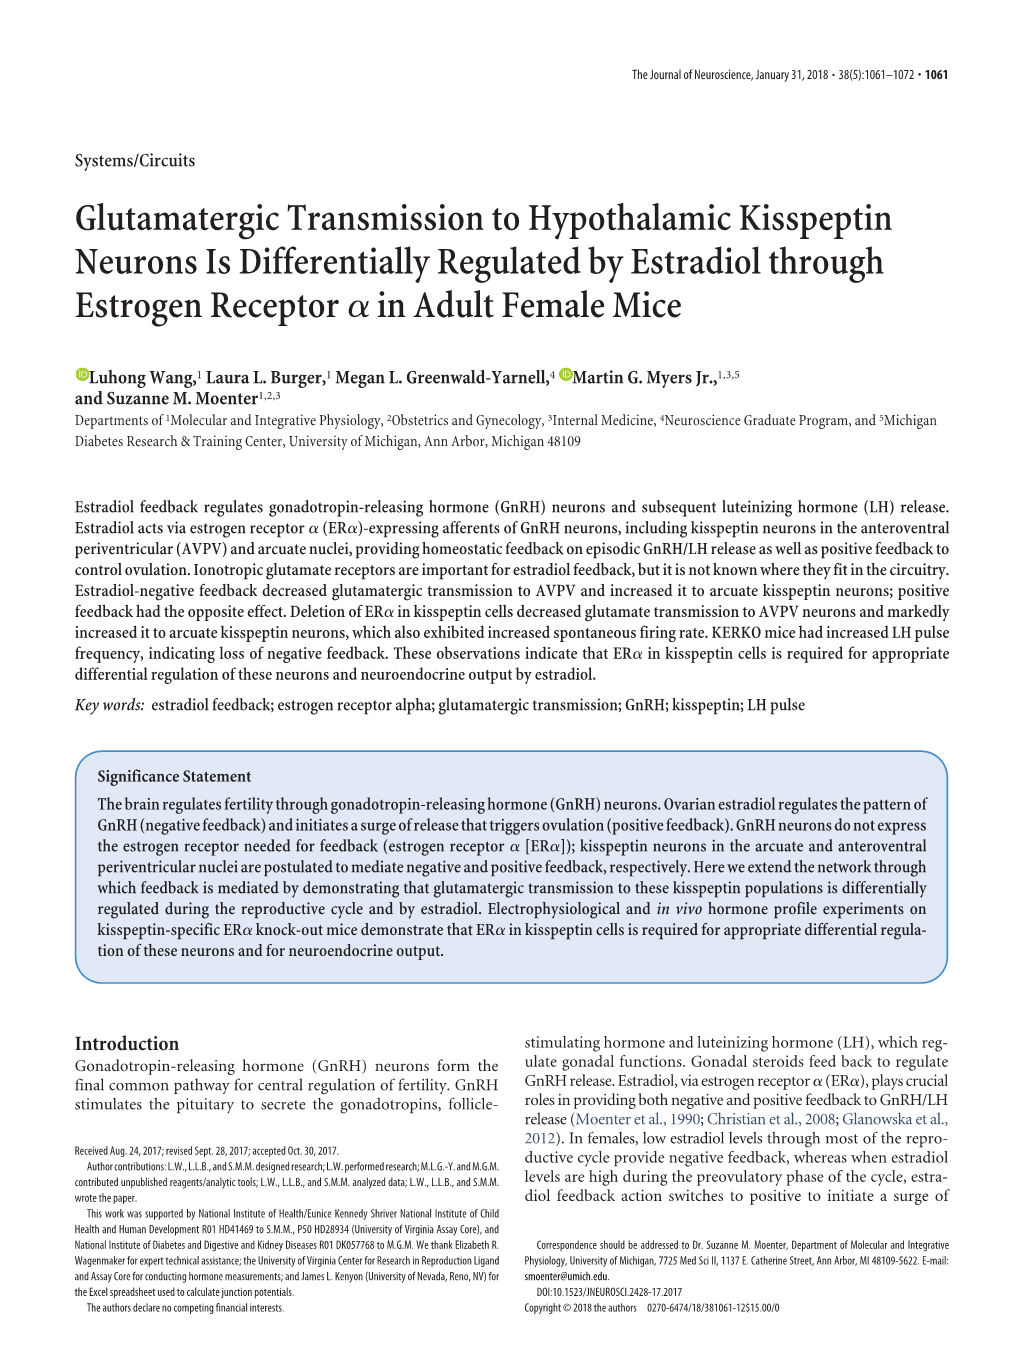 Glutamatergic Transmission to Hypothalamic Kisspeptin Neurons Is Differentially Regulated by Estradiol Through Estrogen Receptor ␣ in Adult Female Mice